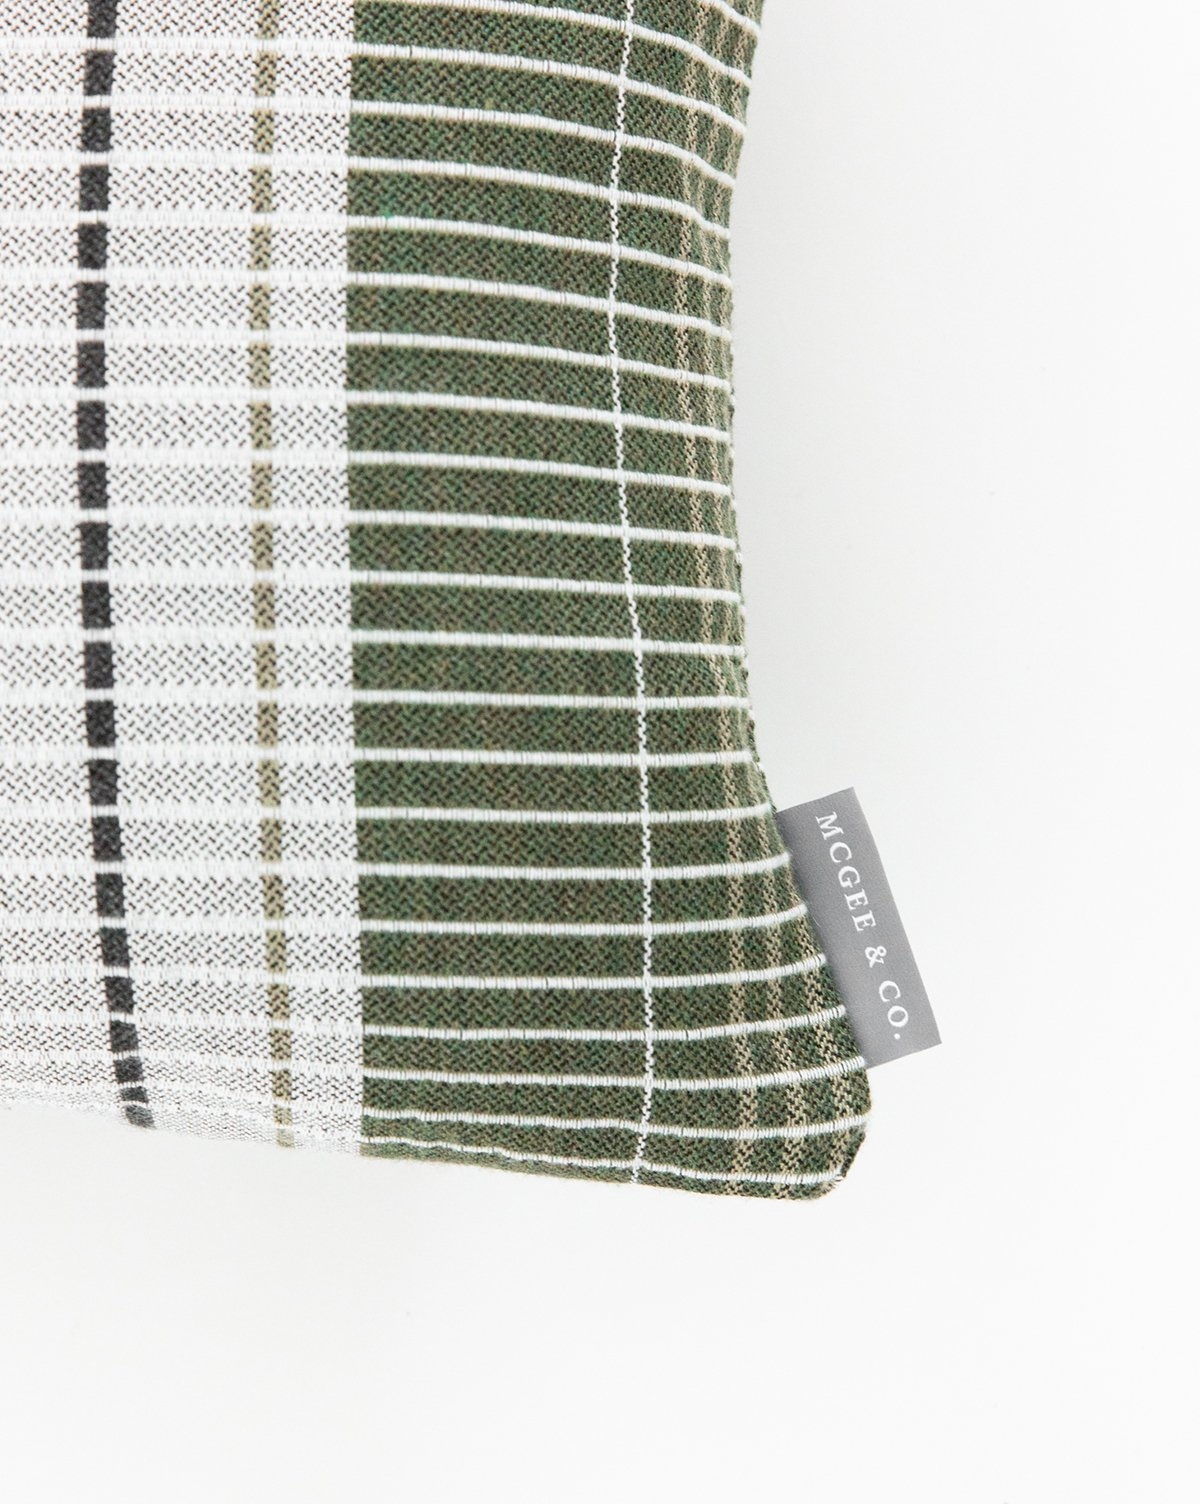 OXFORD WOVEN PLAID PILLOW WITHOUT INSERT, GREEN, 14" x 20" - Image 2